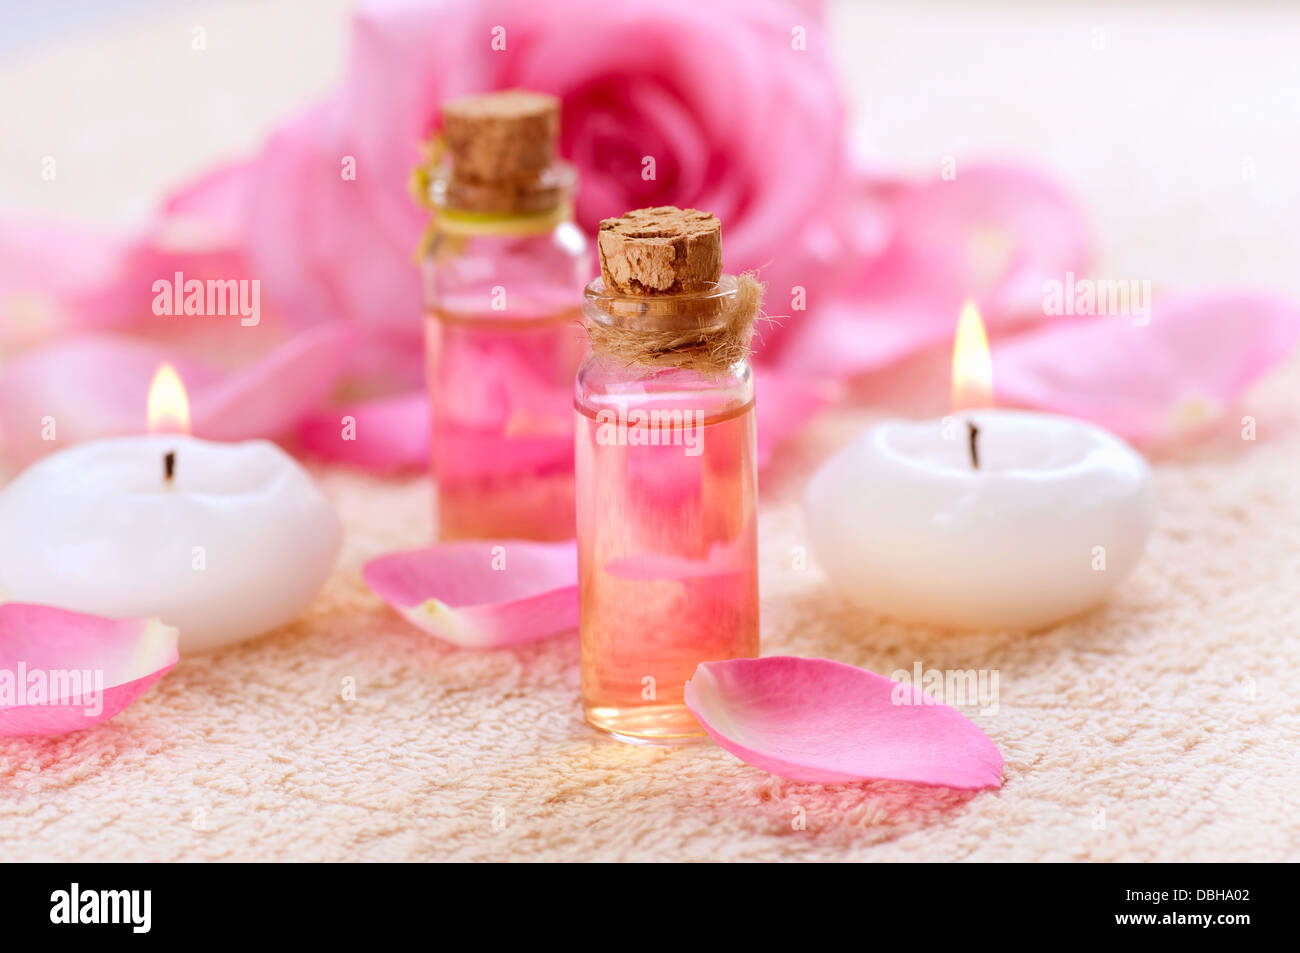 Bottles of Essential Oil for Aromatherapy. Rose Spa Stock Photo